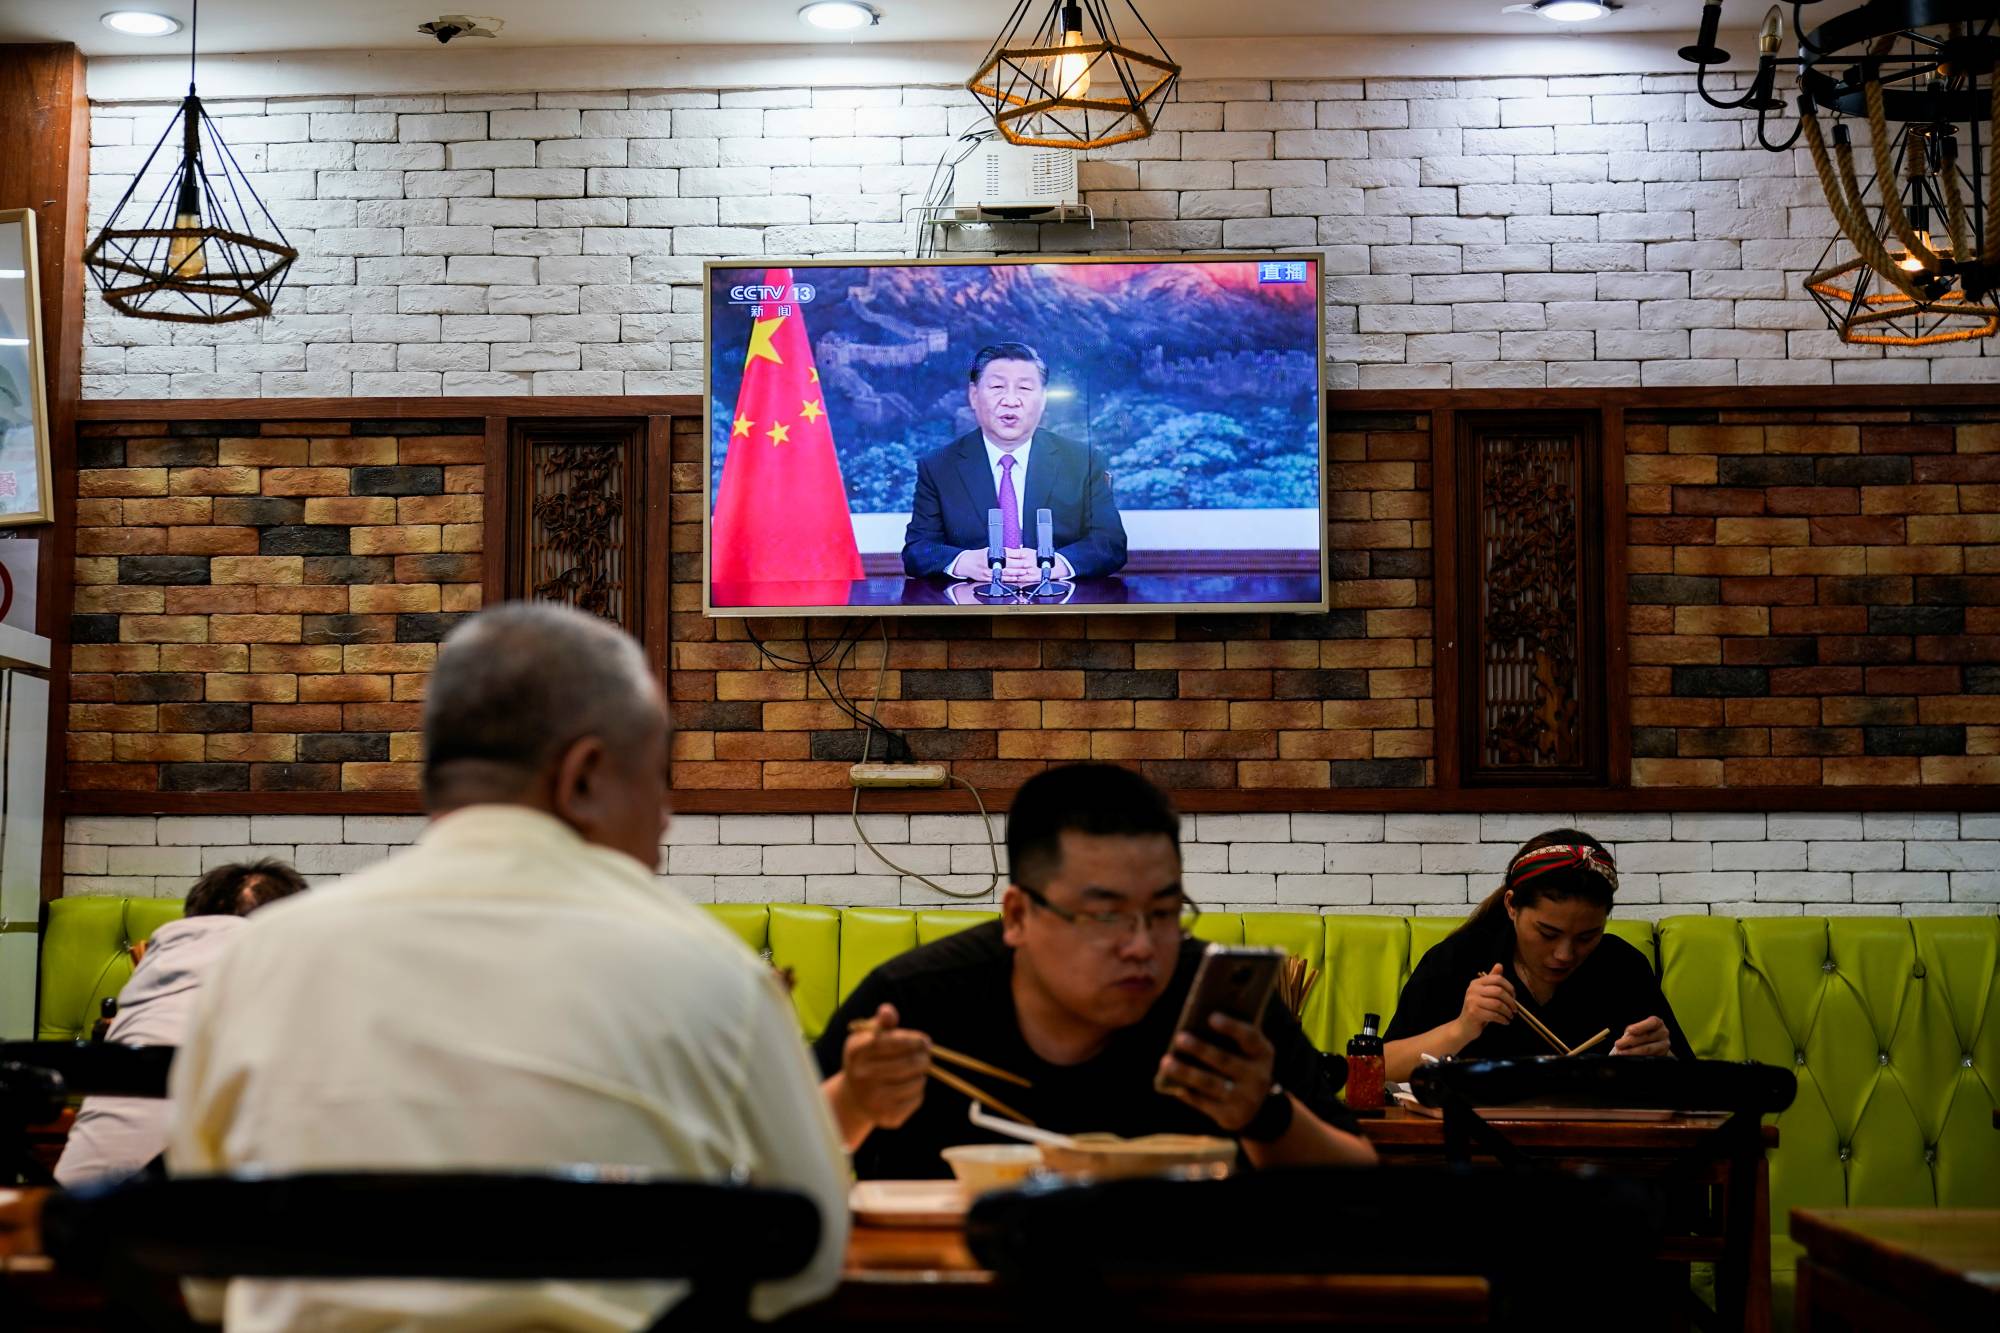 China has imposed limits on the number of hours children can play video games, and Xi Jinping on Sept. 1 told young cadres in a speech that good Communists will 'never be spineless cowards.” | REUTERS